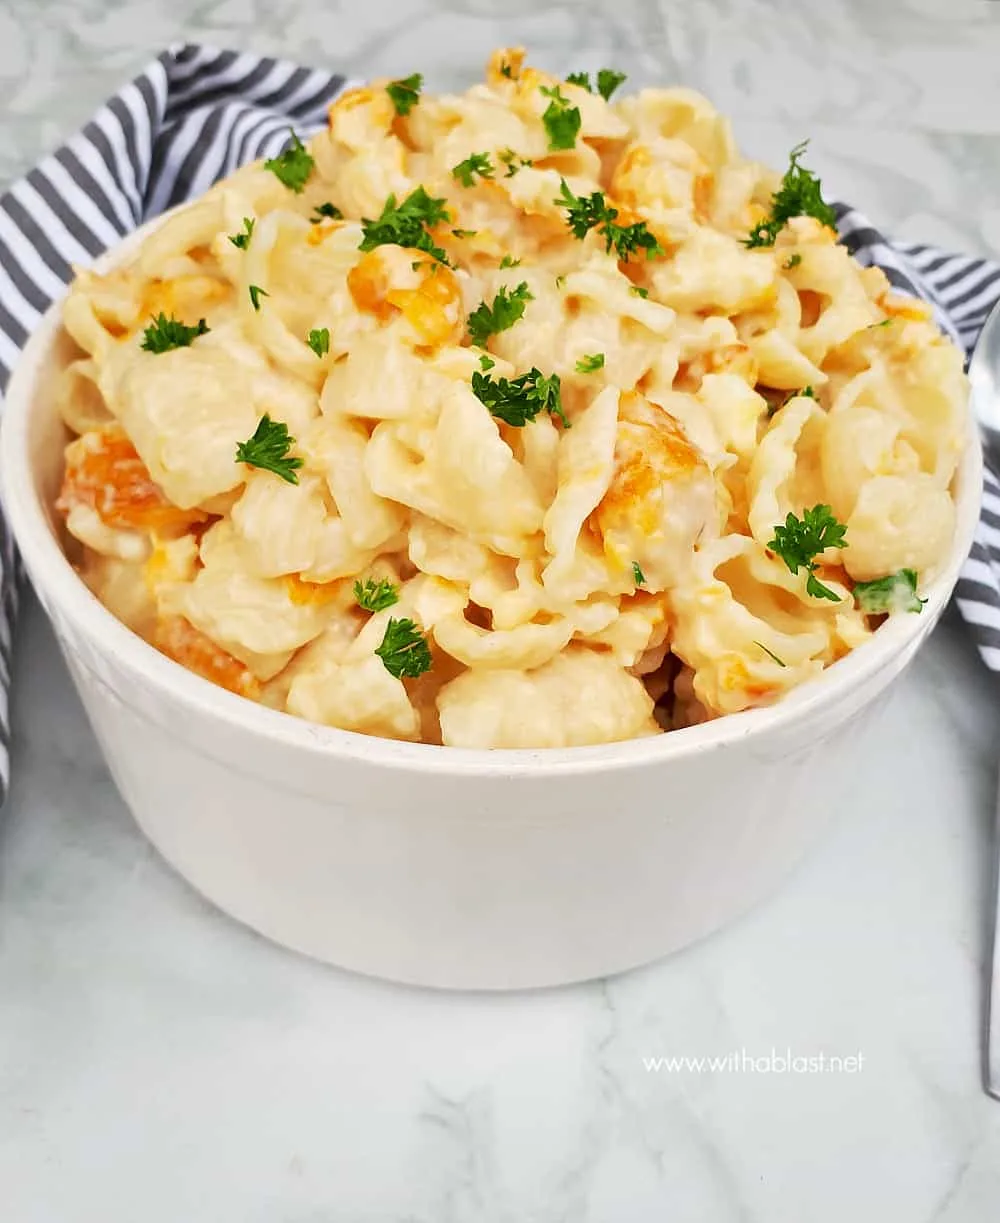 This Cheesy Haddock Pasta is a delicious comforting dish, pasta and fish hugged in a creamy cheese sauce and ready in under 30 minutes !